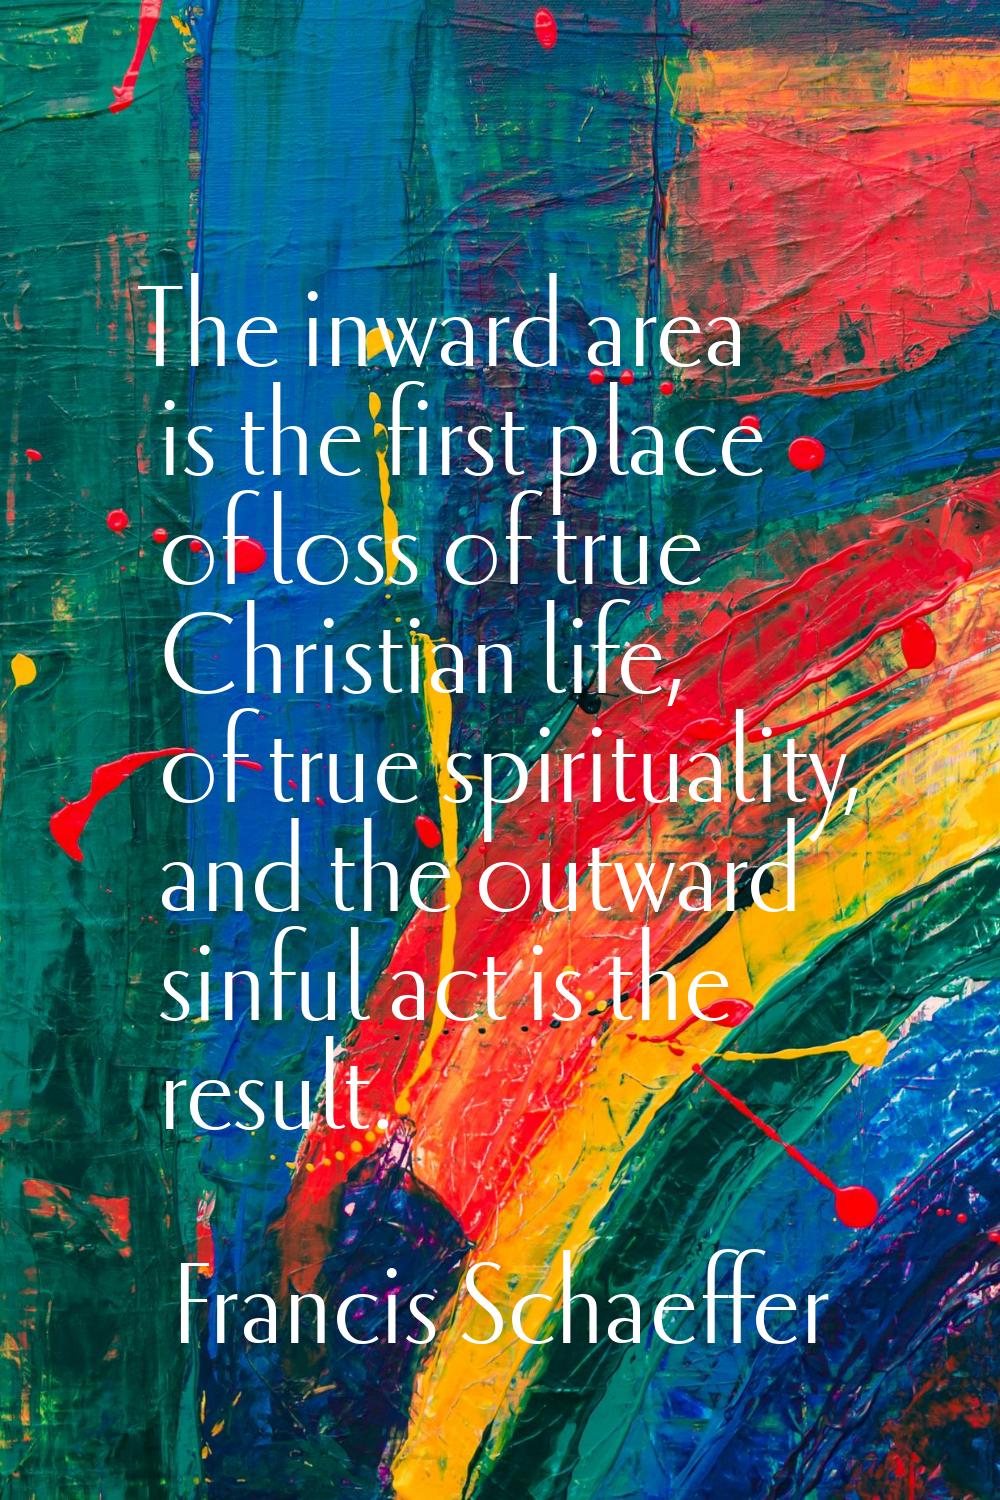 The inward area is the first place of loss of true Christian life, of true spirituality, and the ou